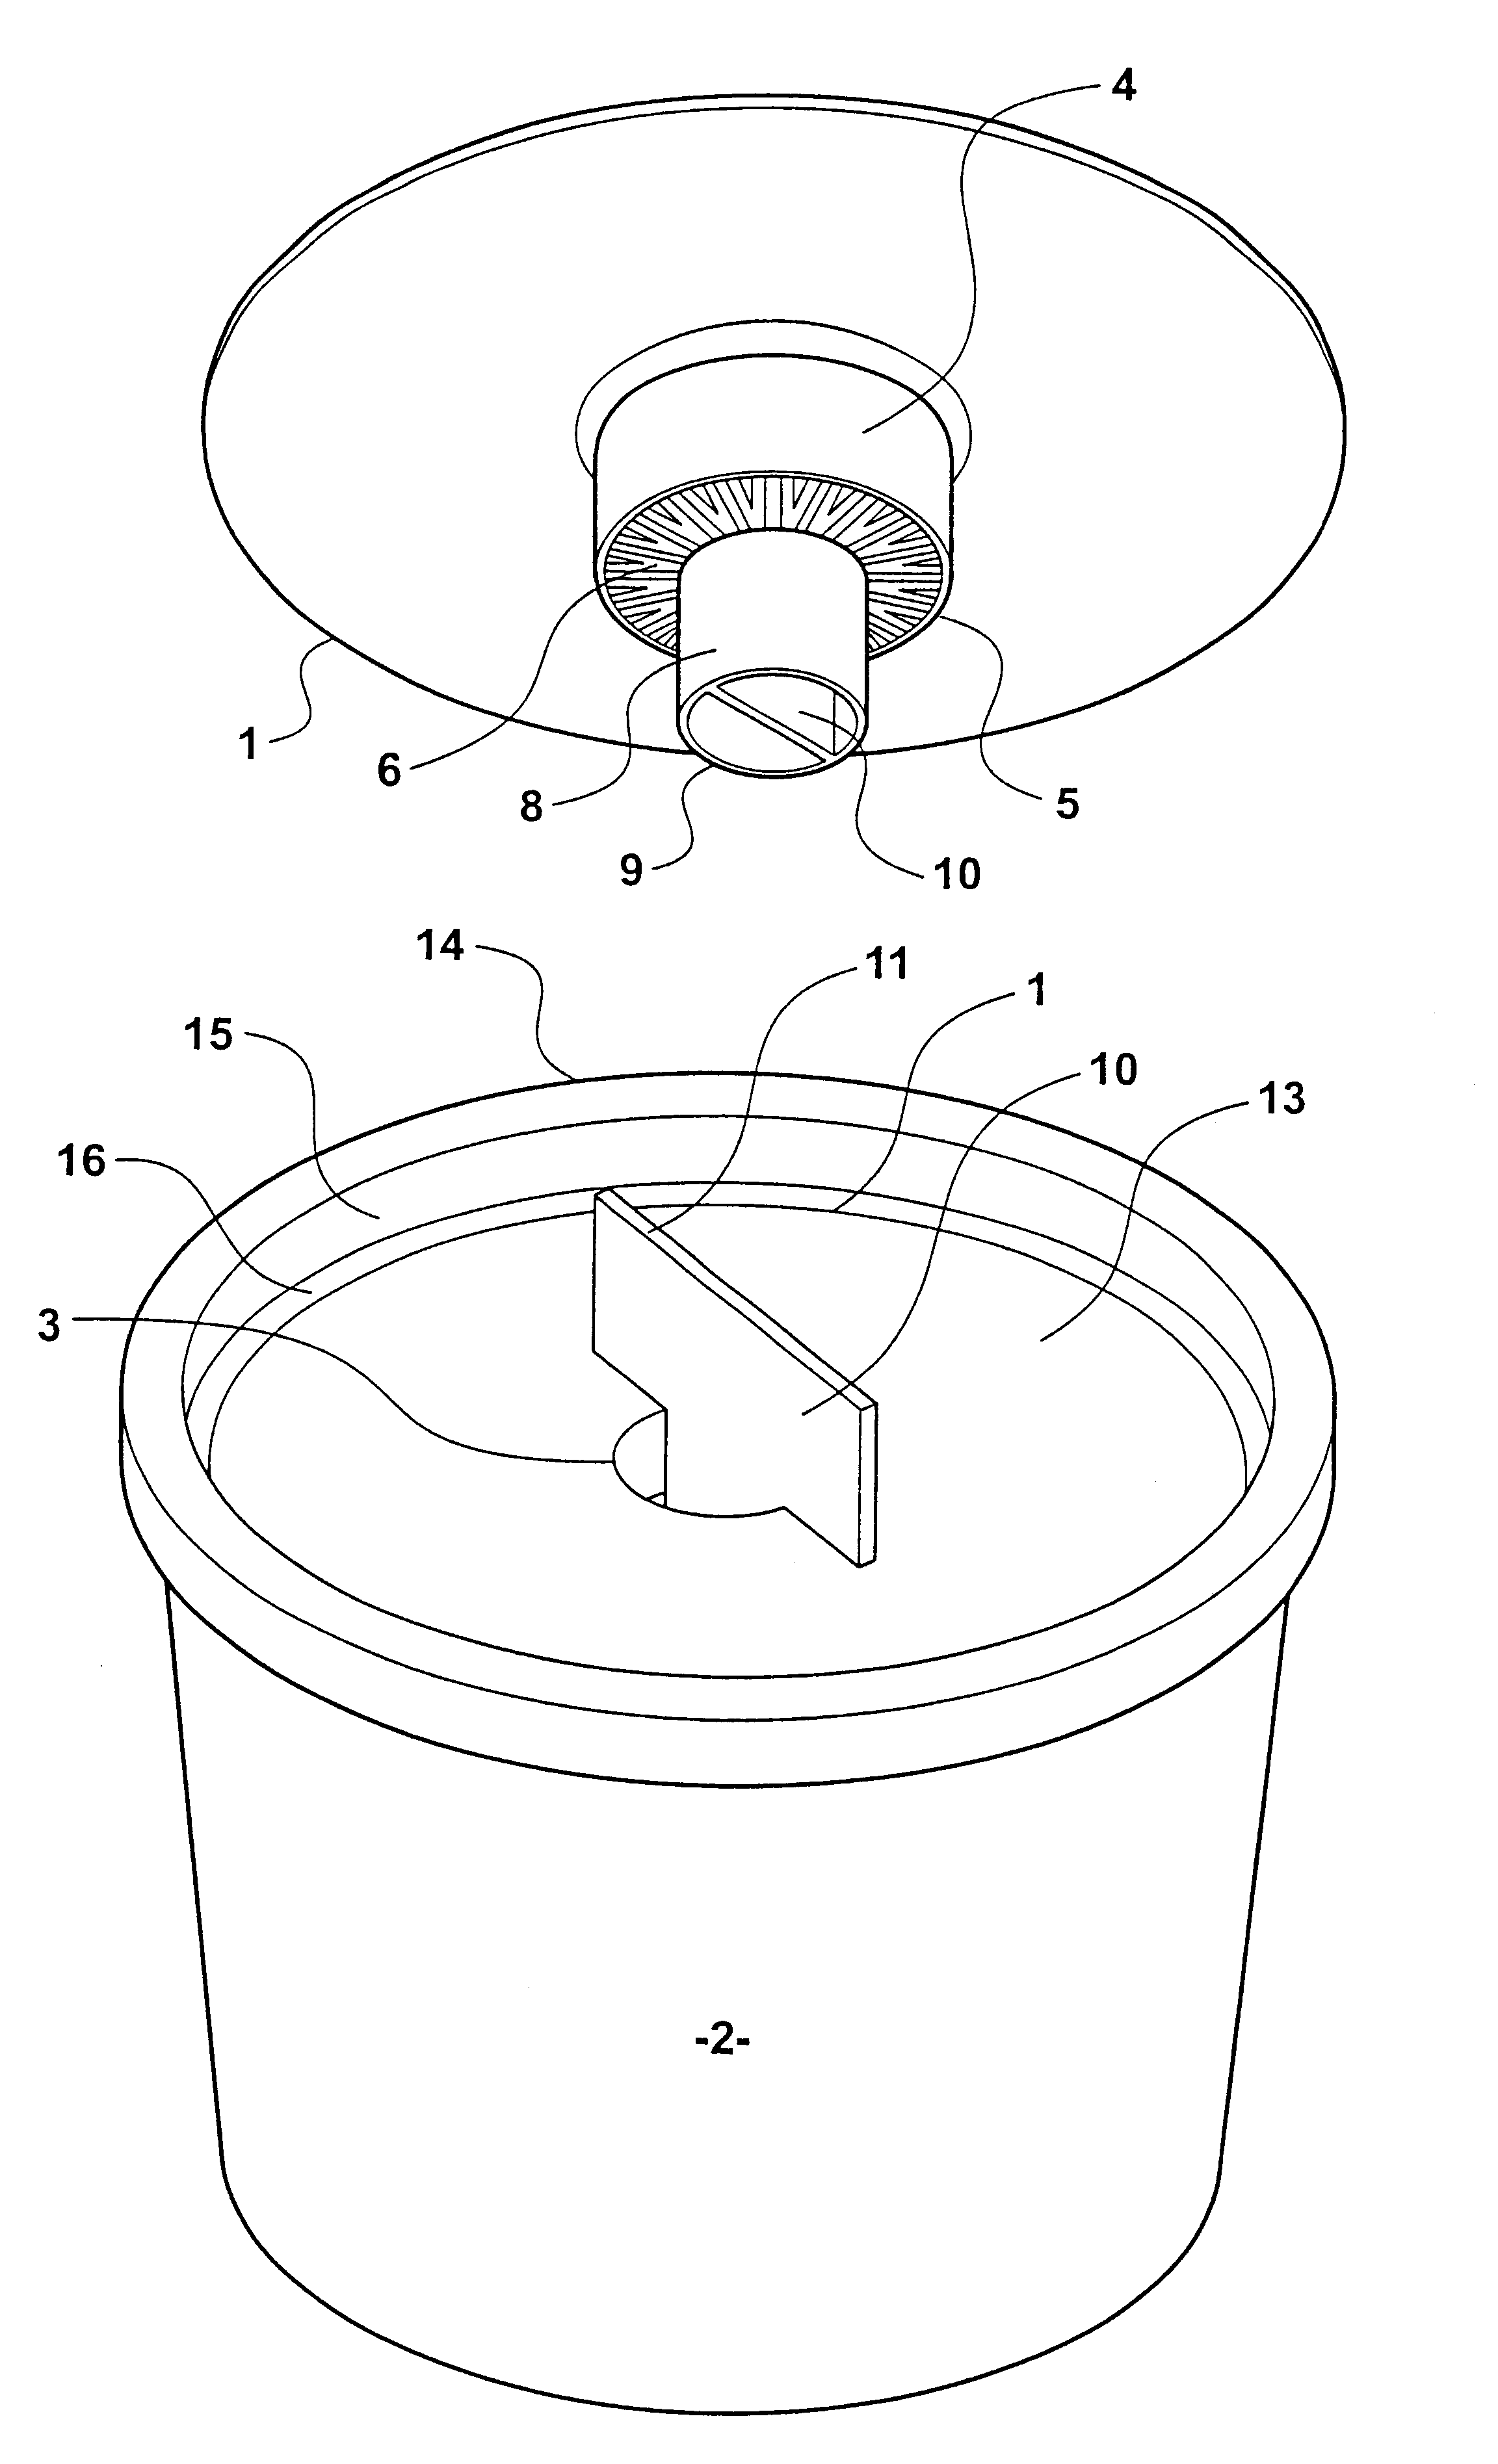 Insect trap and fitting